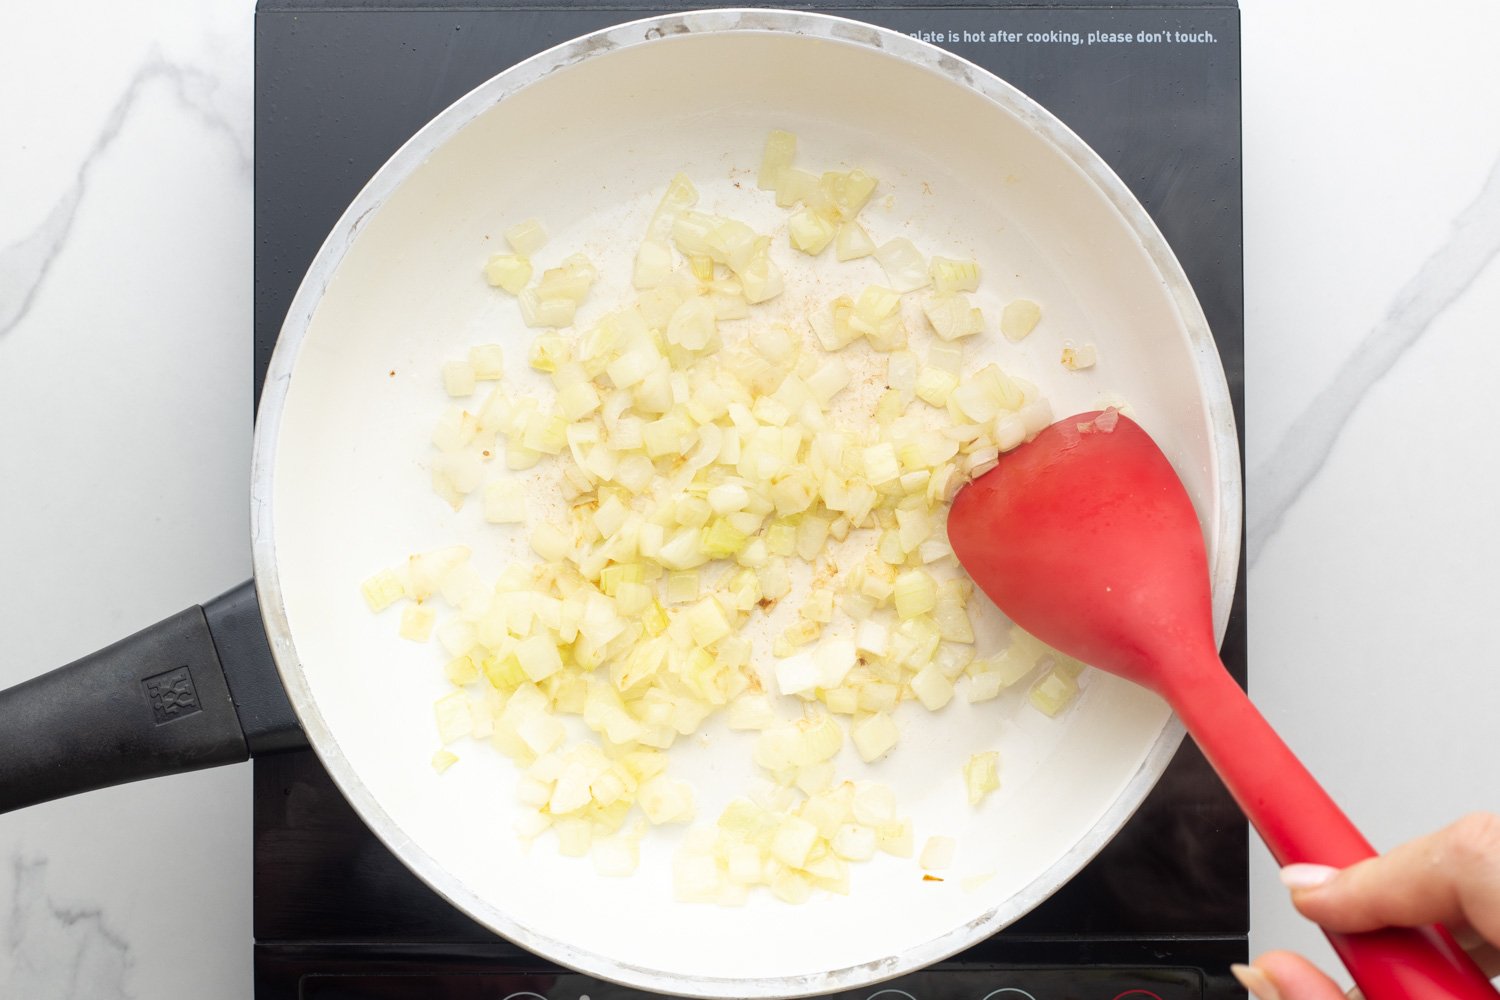 diced onion sauteed in a white skillet over an electric burner, stirred with a red spoon.